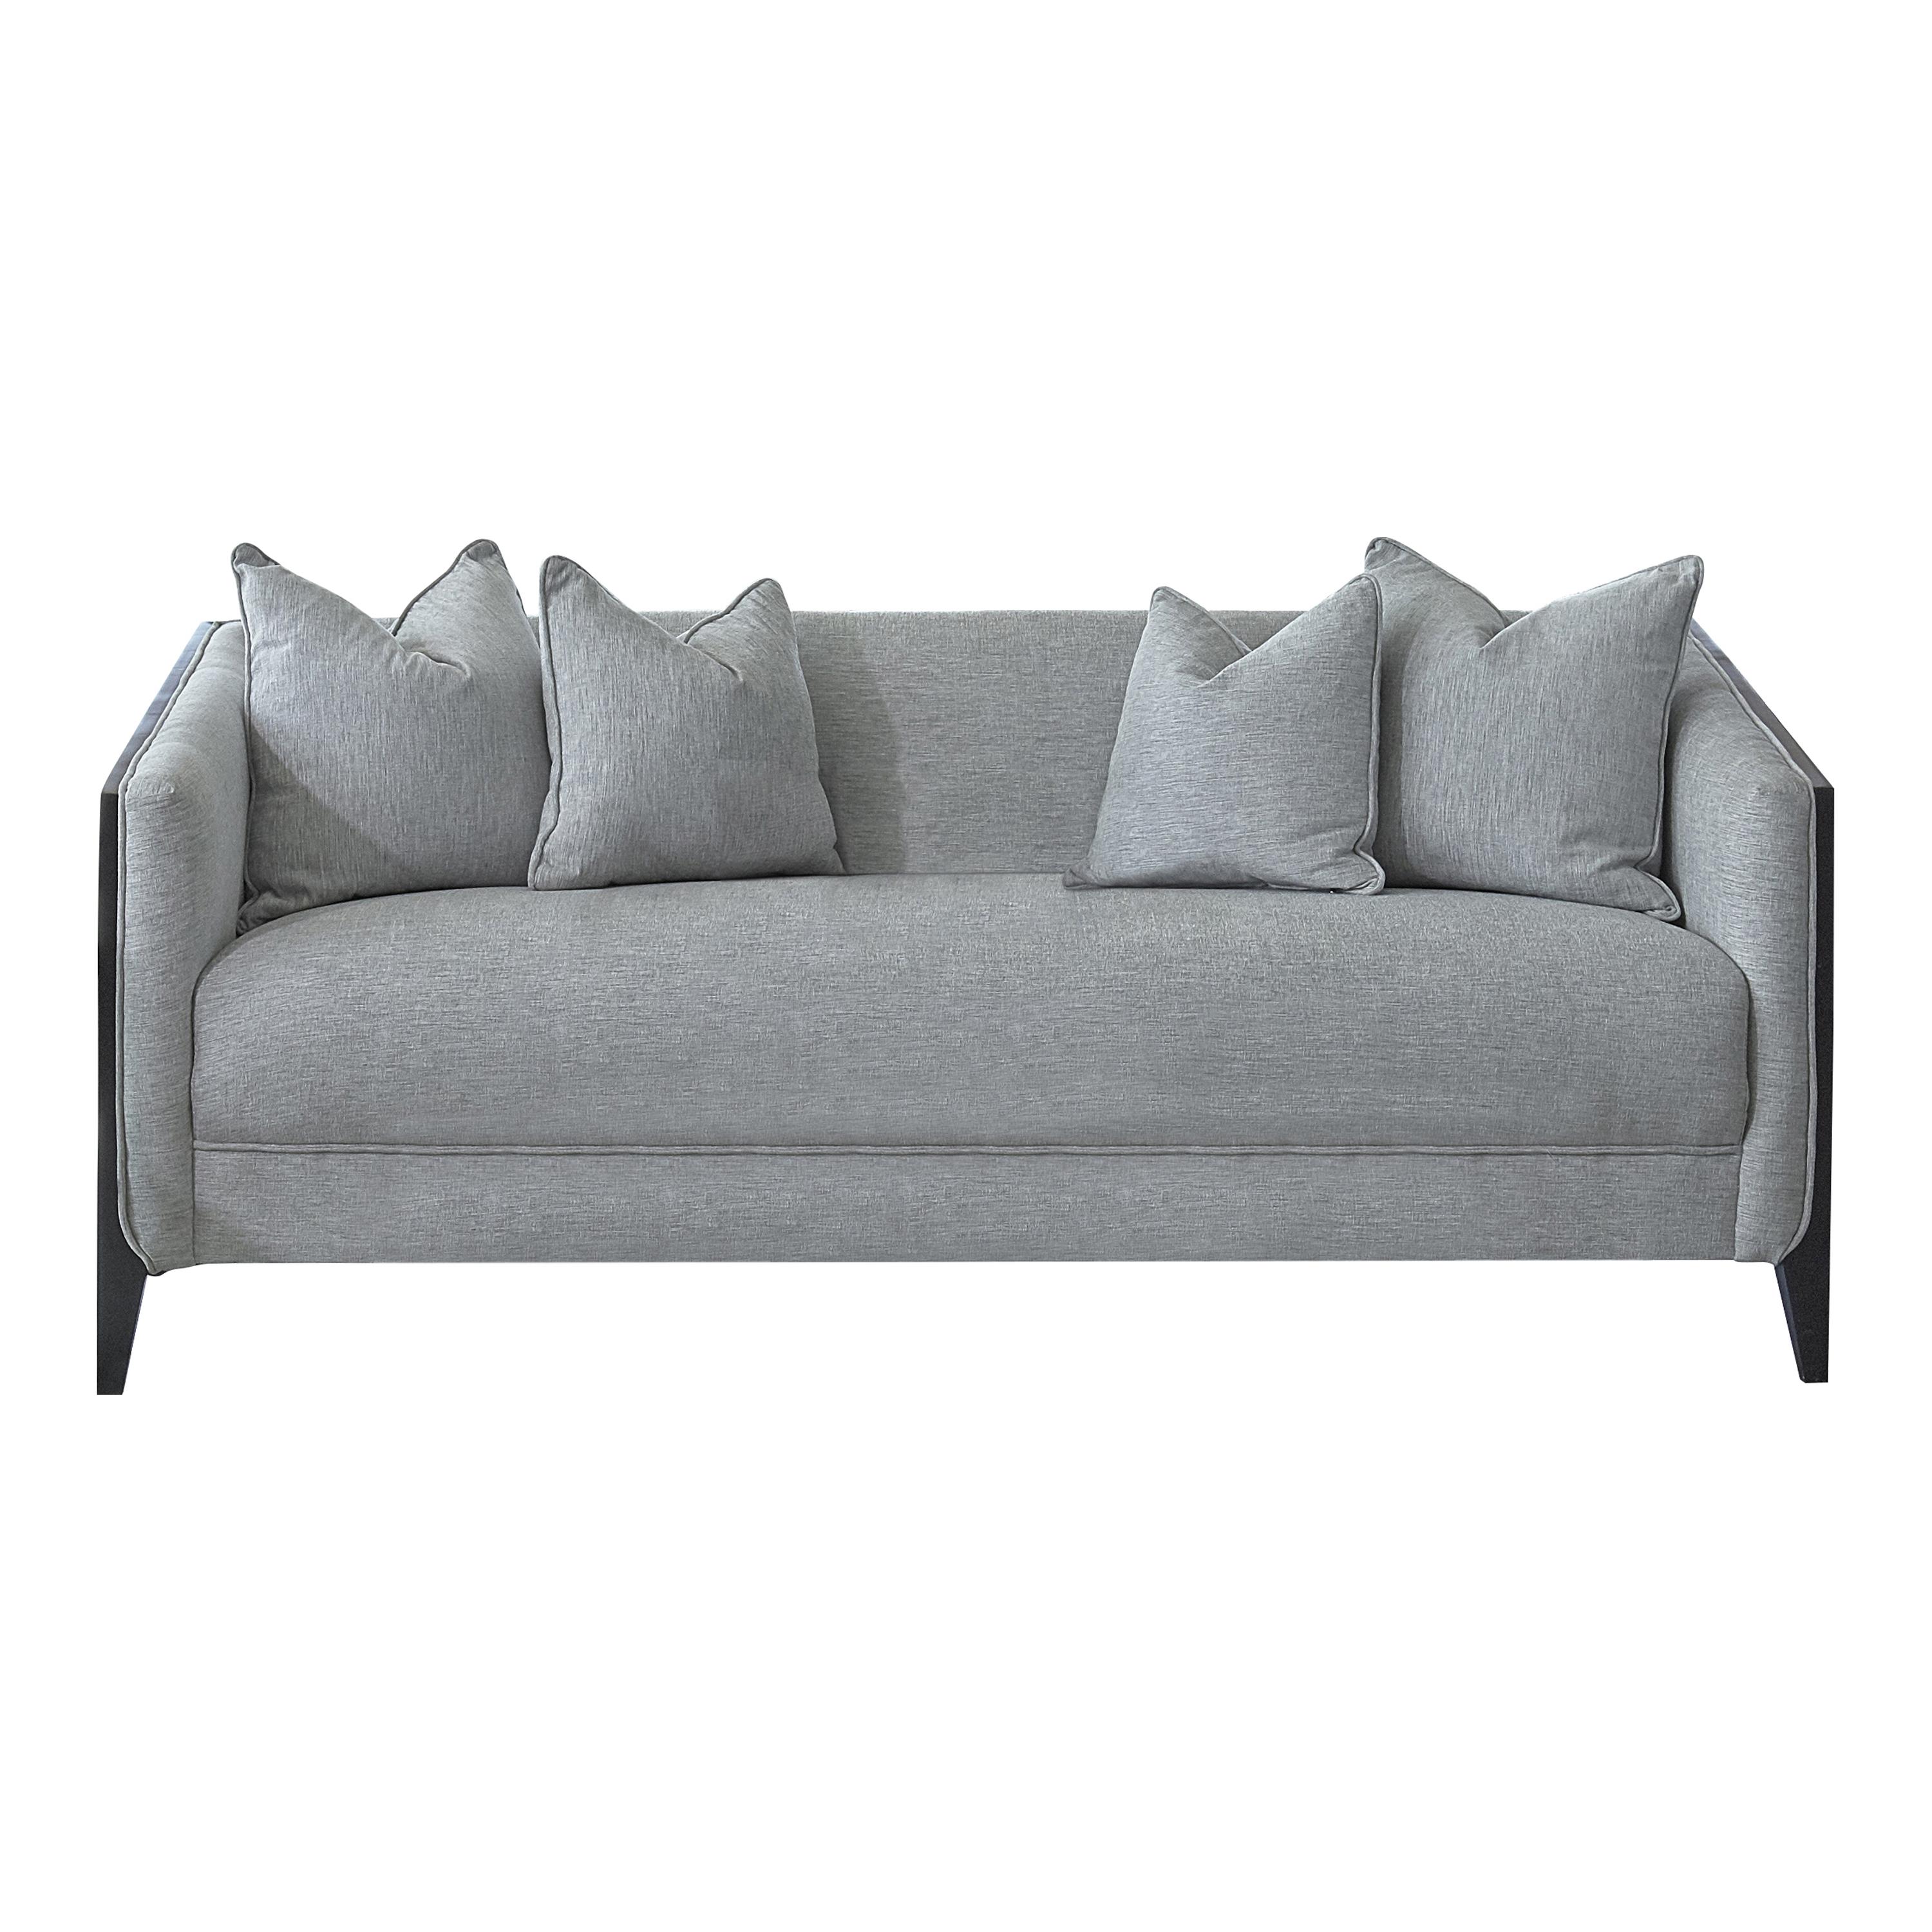 Transitional Sofa 509201 Whitfield 509201 in Gray Chenille